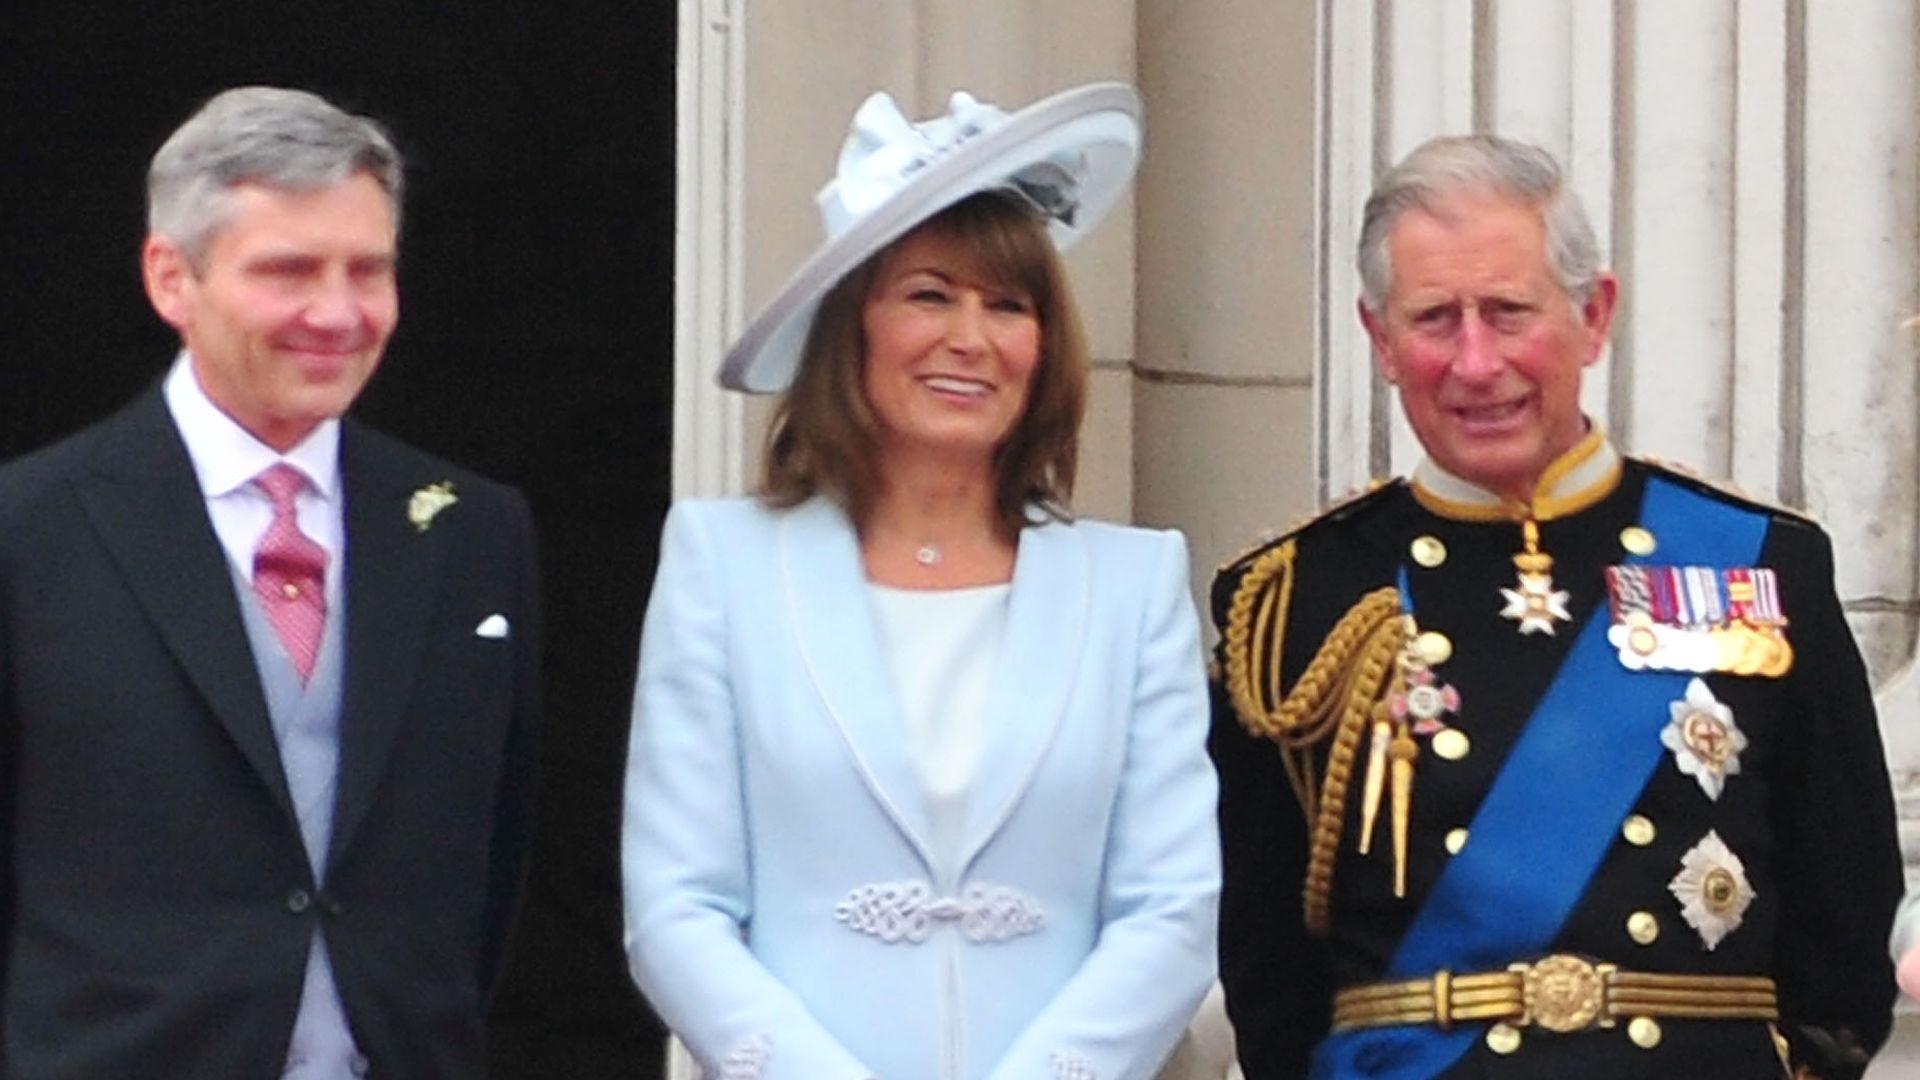 King Charles with Carole and Michael Middleton